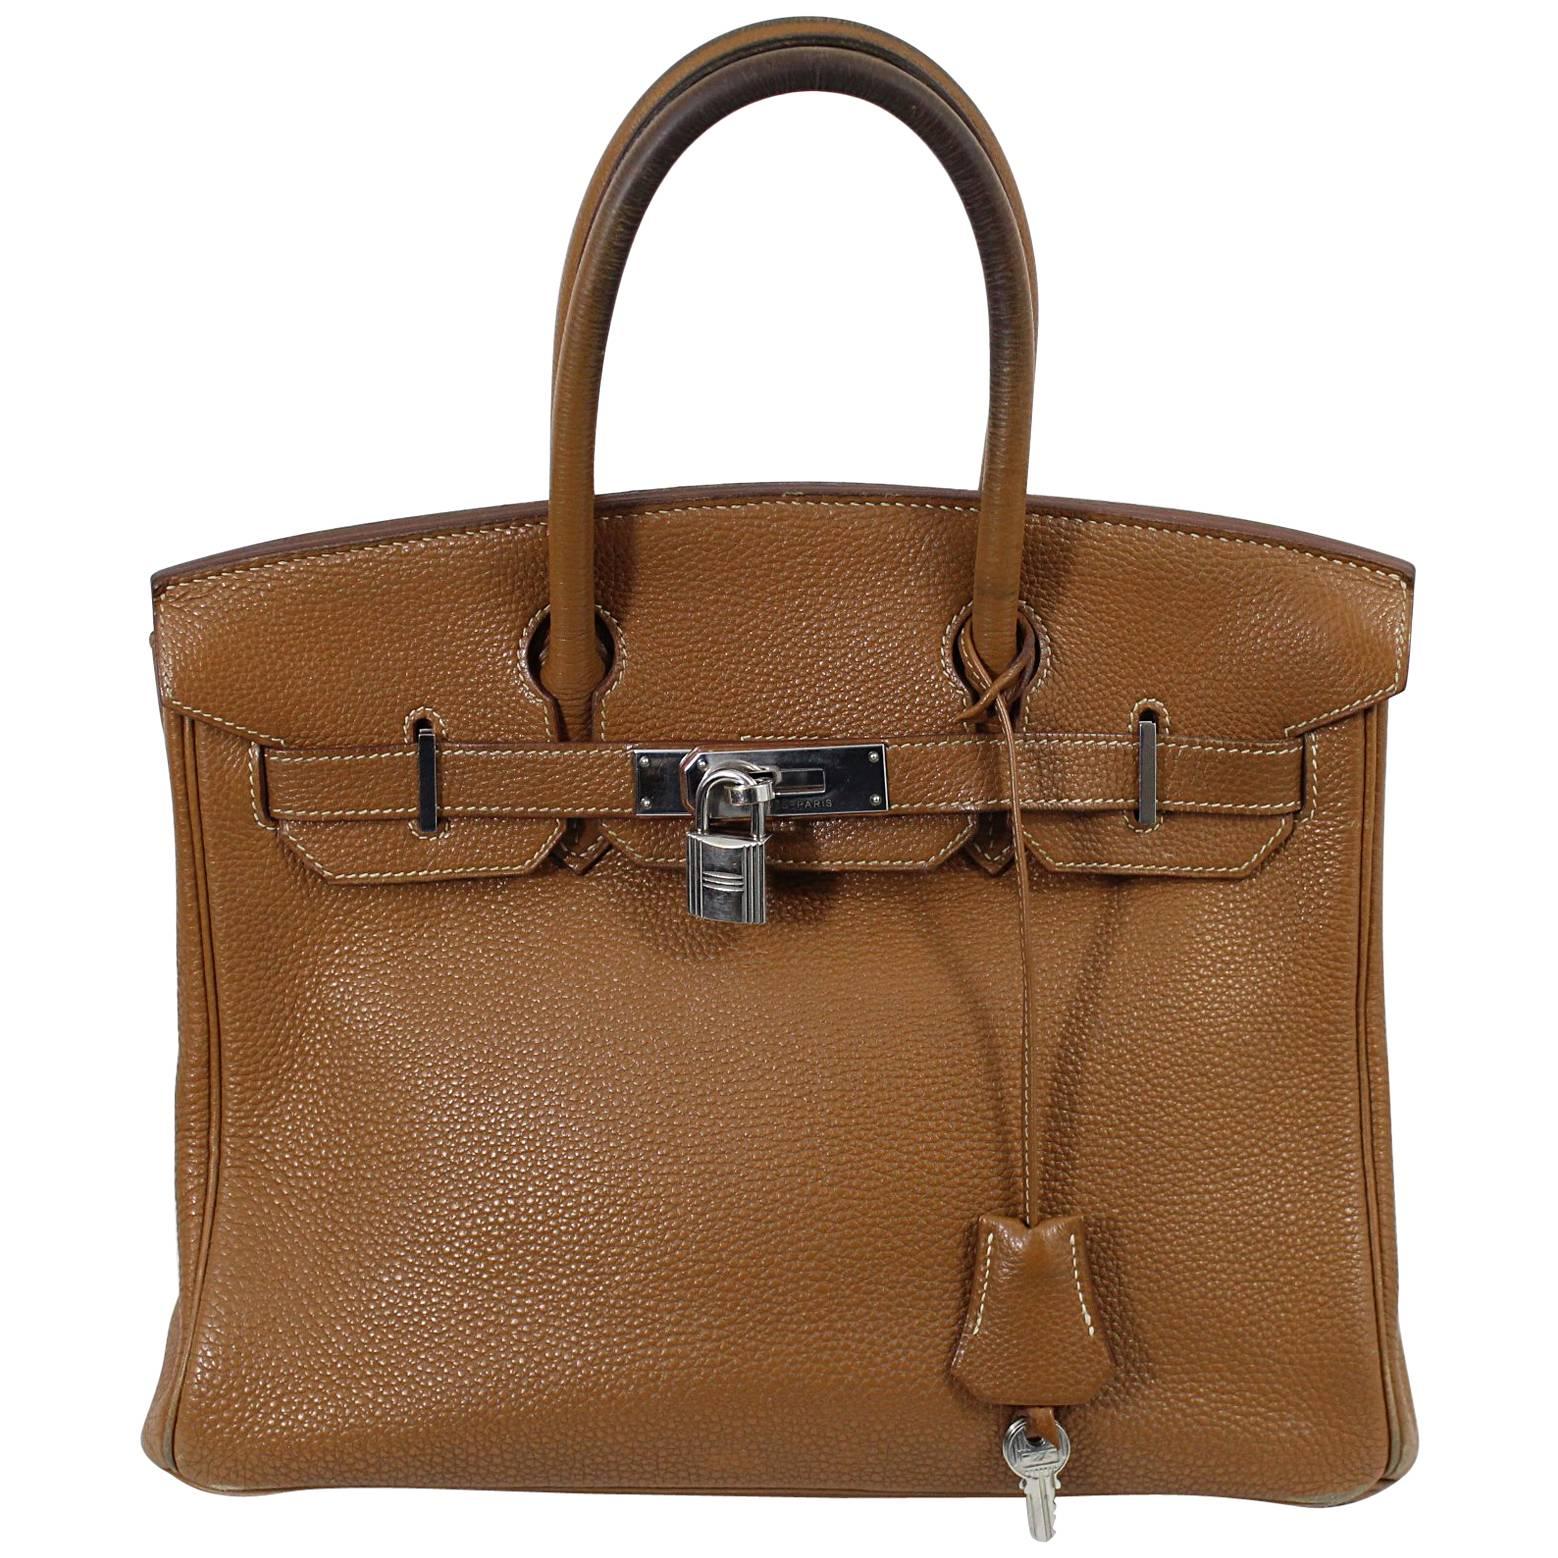 Hermes Birkin 30 Bag in Gold Leather with padlock and keys Fair condition.